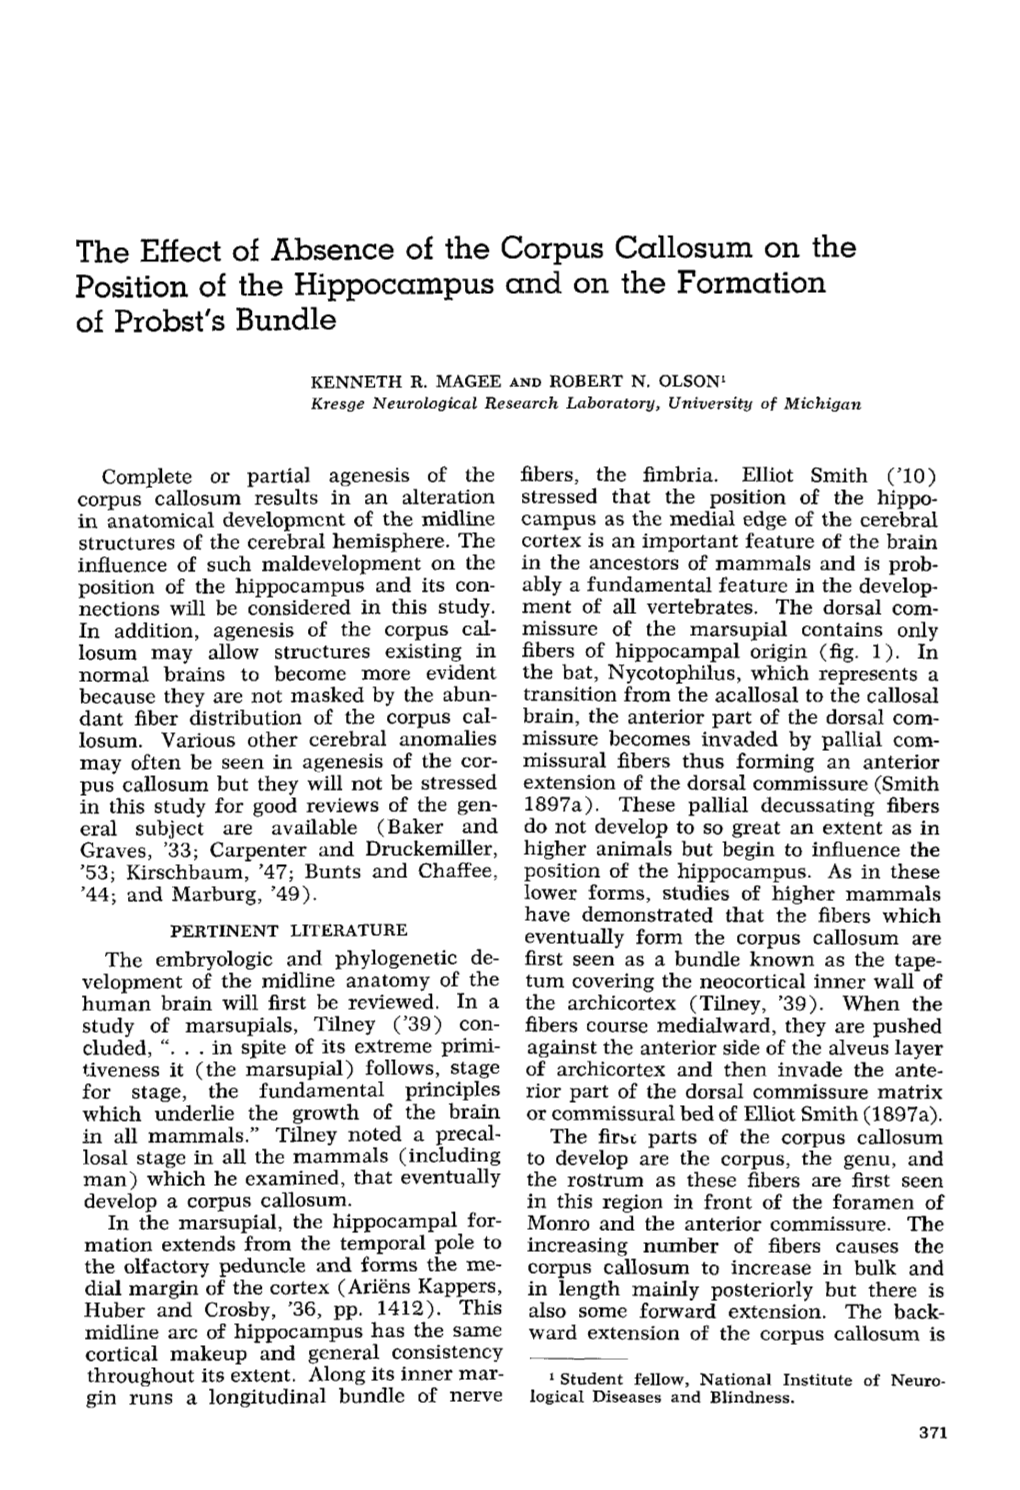 The Effect of Absence of the Corpus Callosum on the Position of the Hippocampus and on the Formation of Probst's Bundle